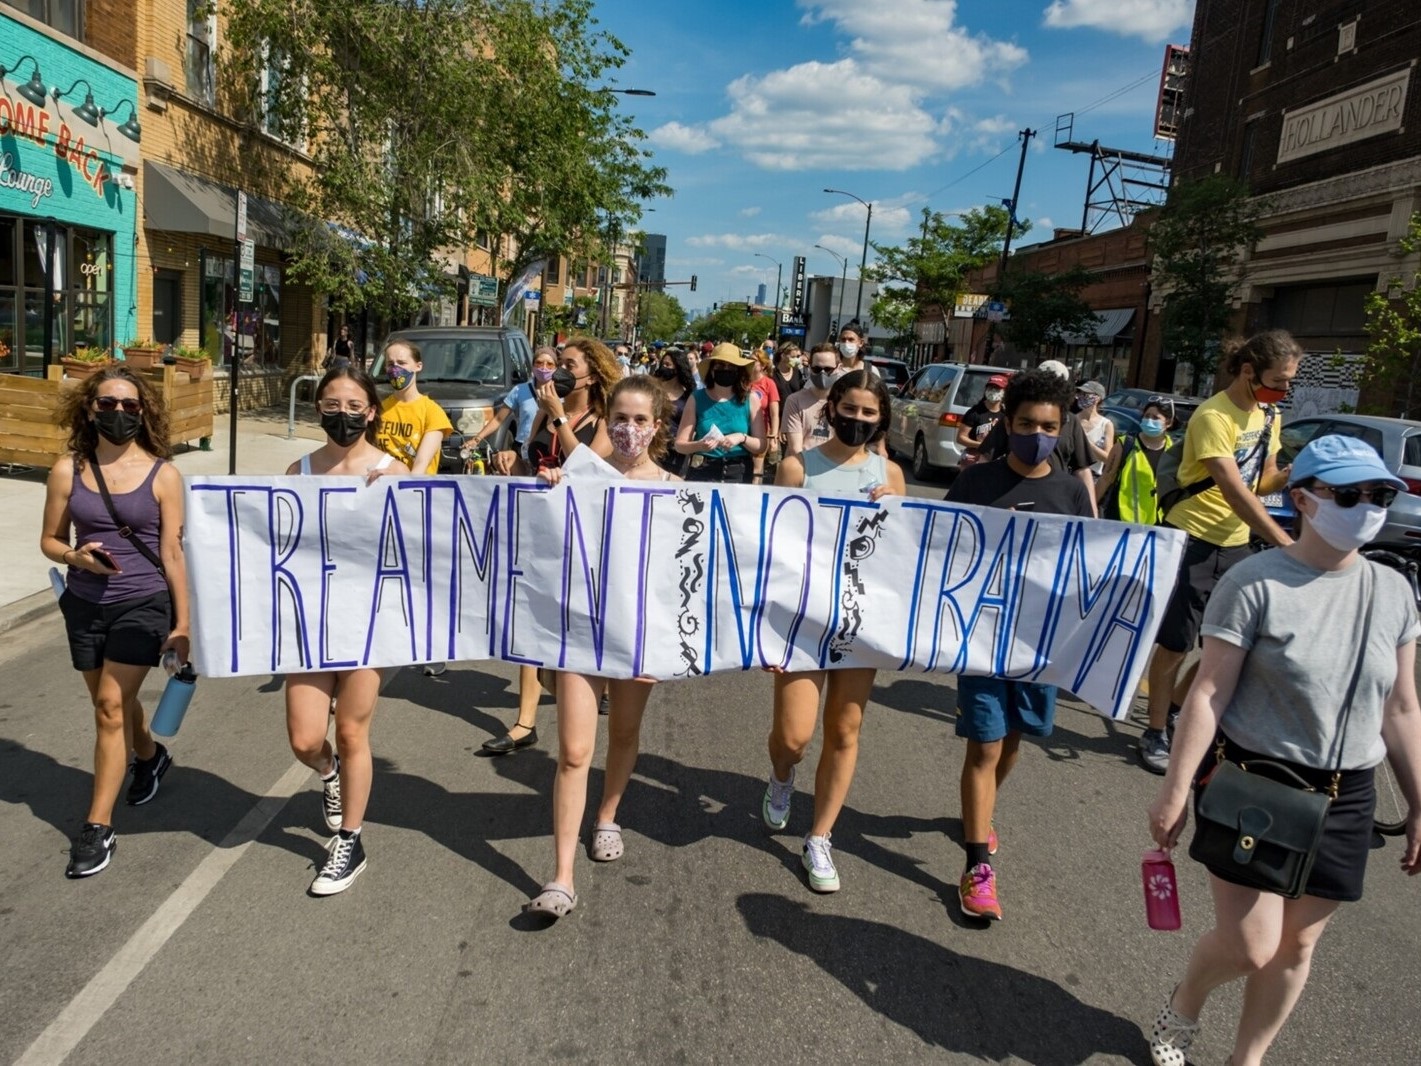 March in Chicago for Treatment Not Trauma